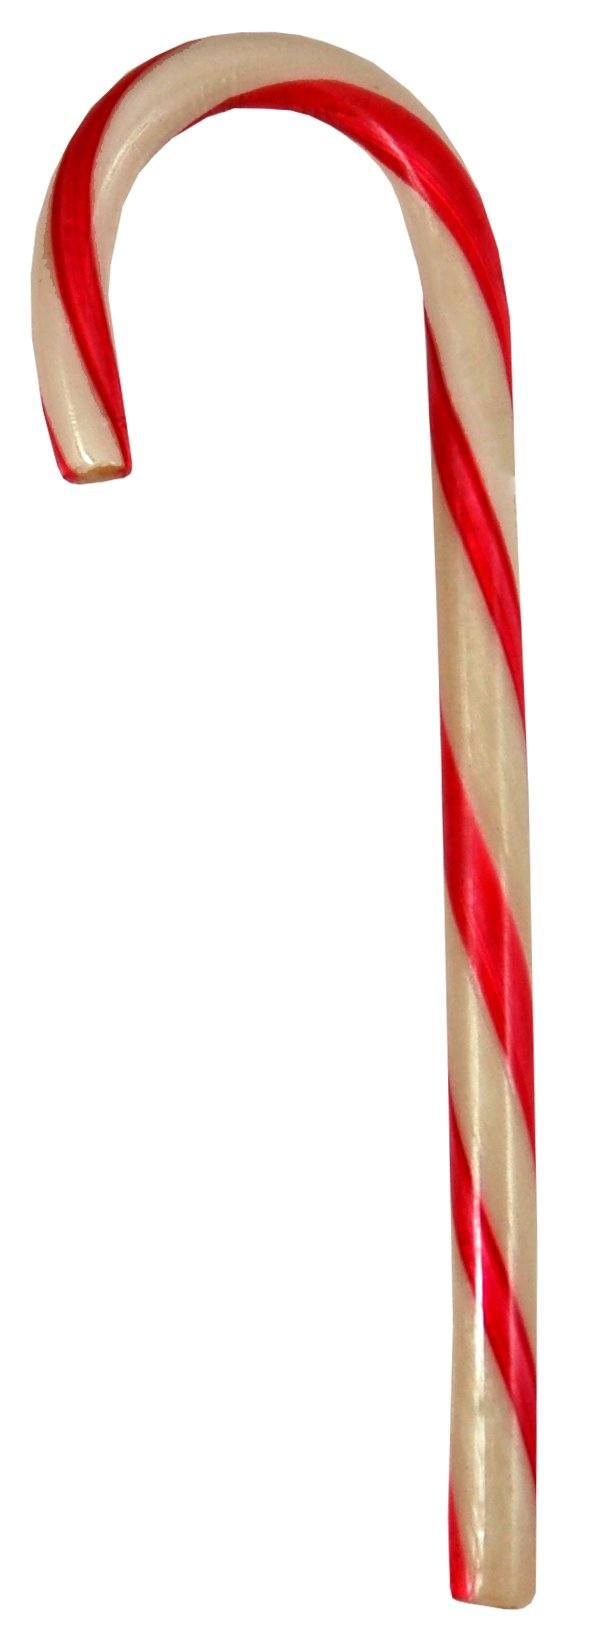 Flavored Candy Canes Spangler 